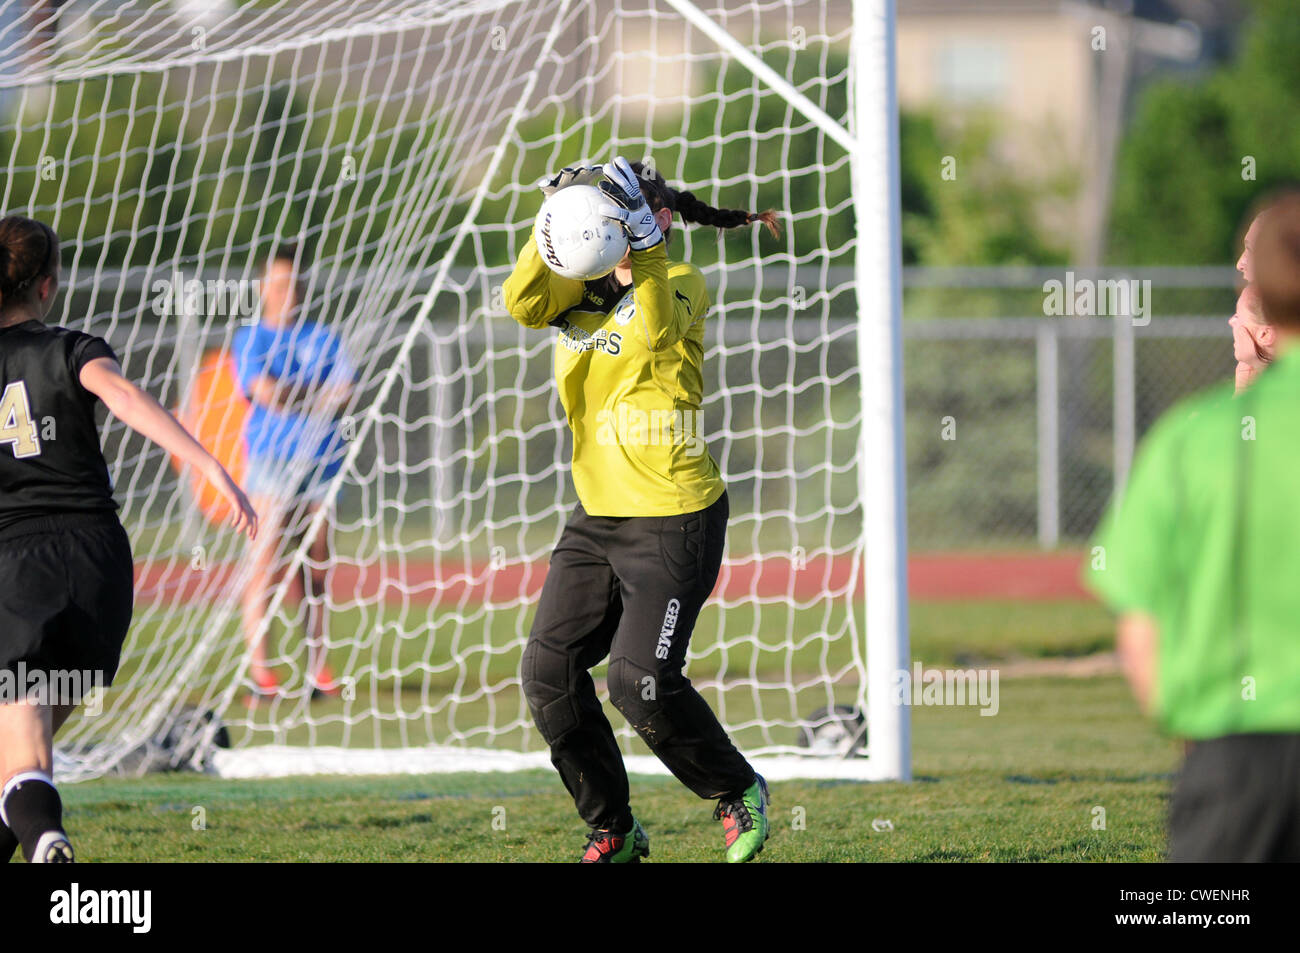 Soccer Goal keeper makes a save during a high school match. Stock Photo